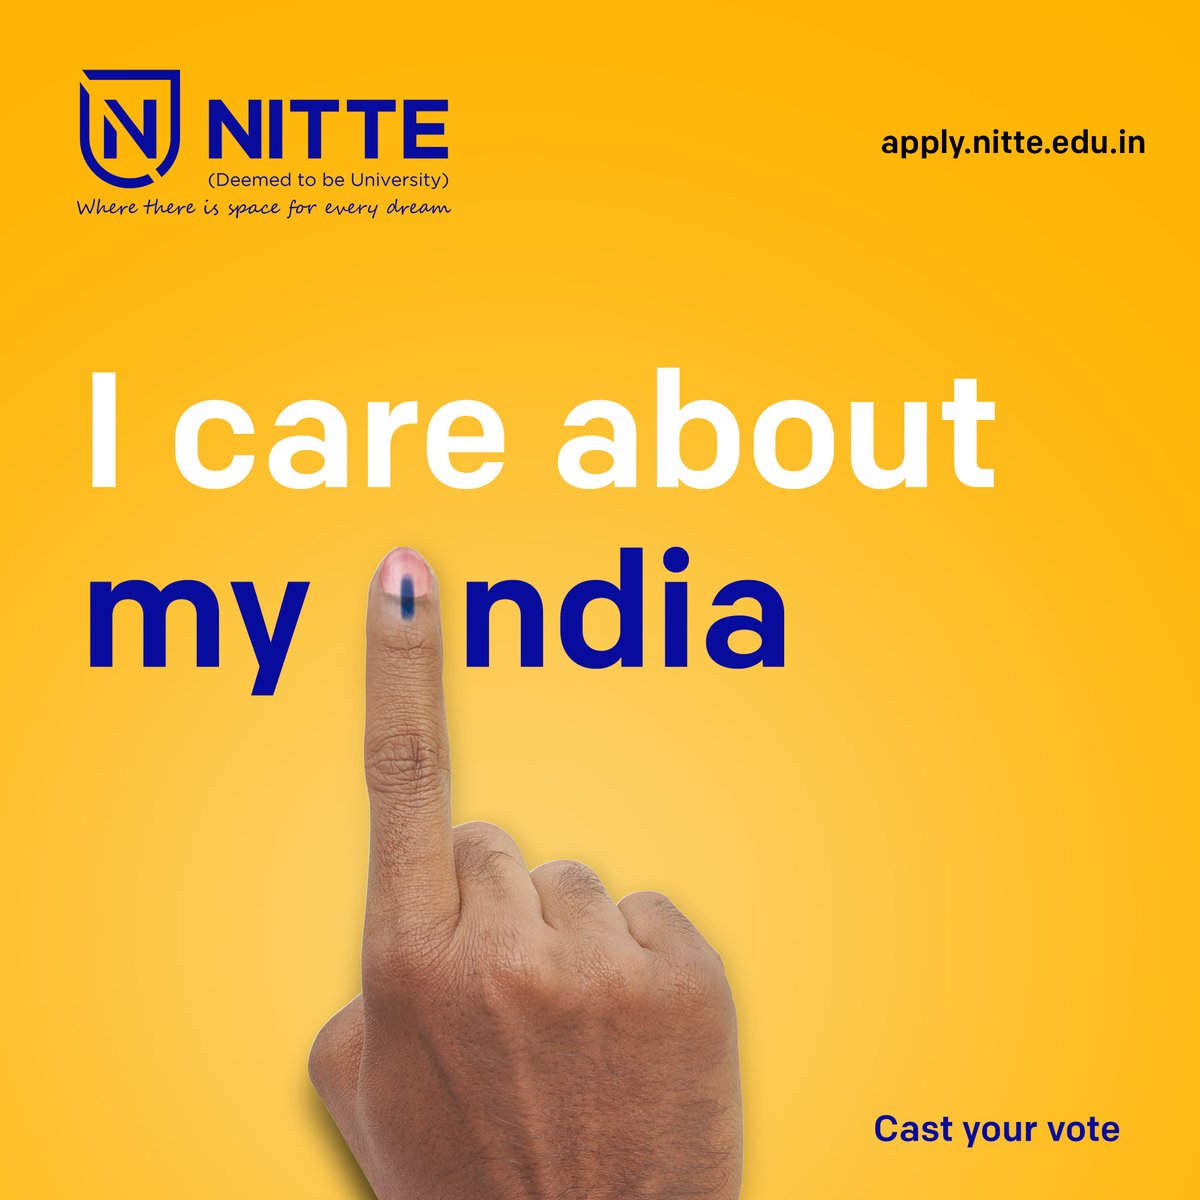 Your vote can make a difference & get the right person to represent you. 

Cast your vote.

#NitteUniversity #vote #voting #votingtime #votevotevote #vote2024 #dovote #votingrights #votingmatters #votingrightsact #votingday #votingpower #topicalspot #topicalpost #topical